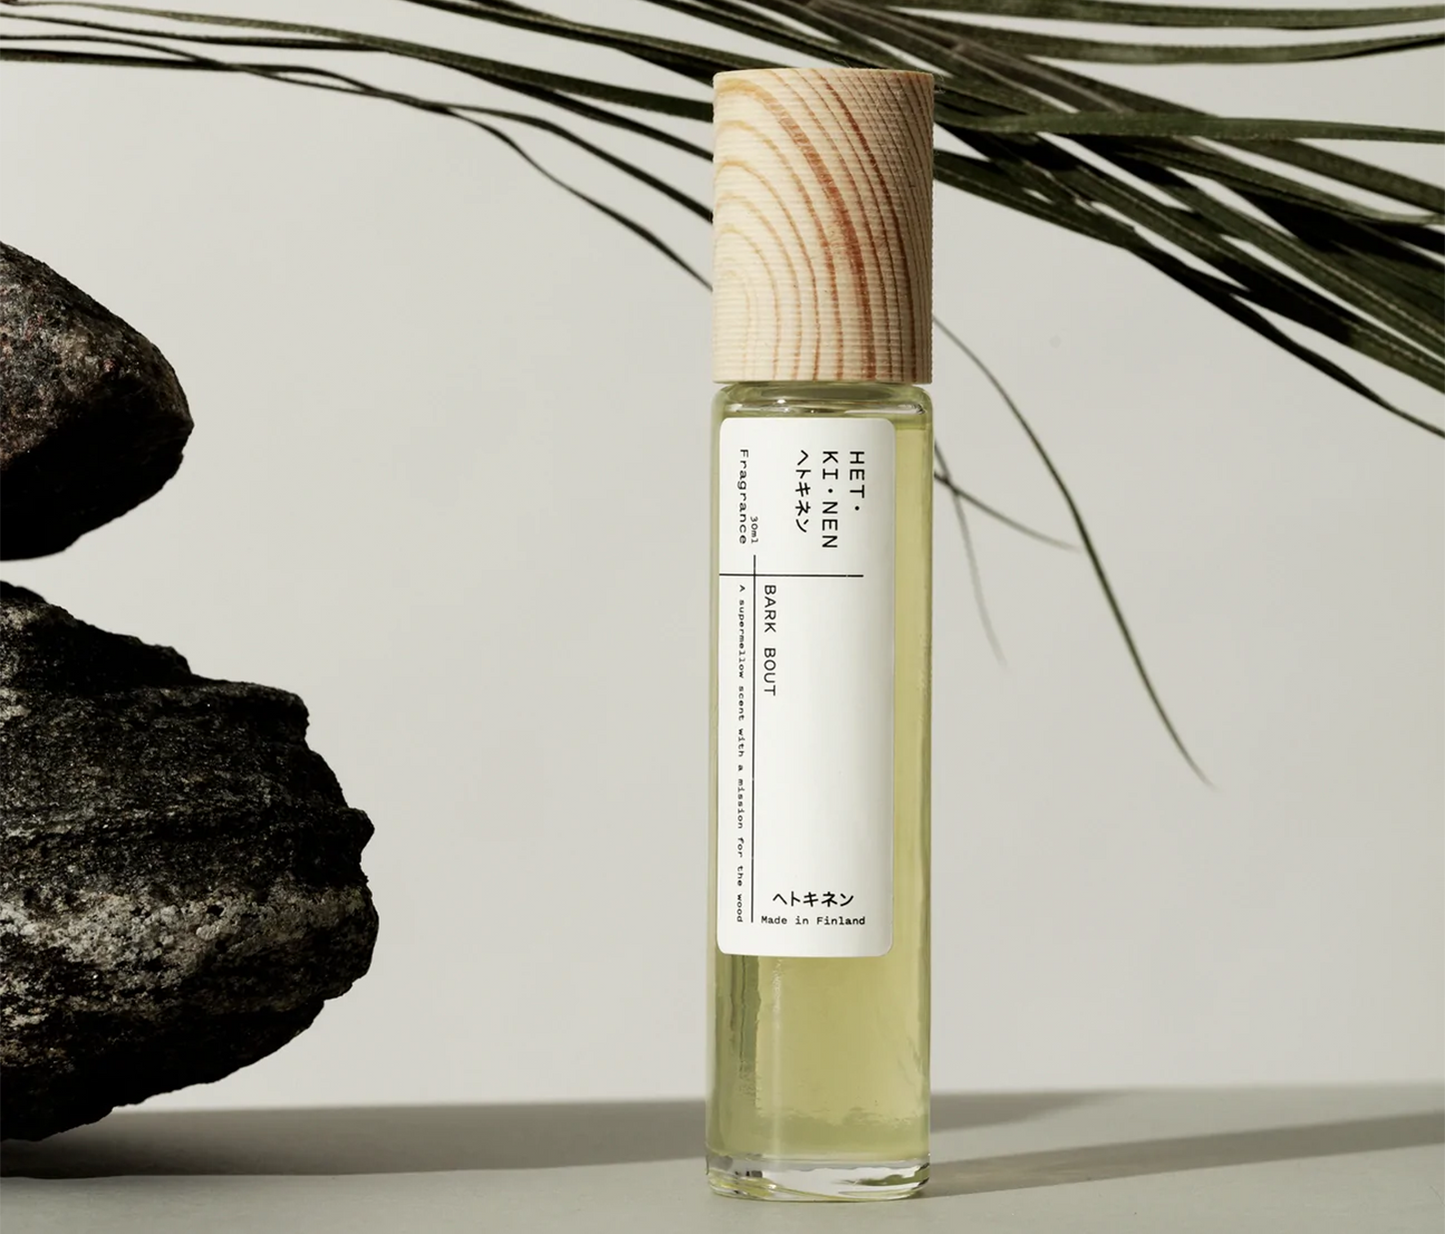 Hetkinen Body Fragrance - Bark Bout against backdrop of rocks and palms